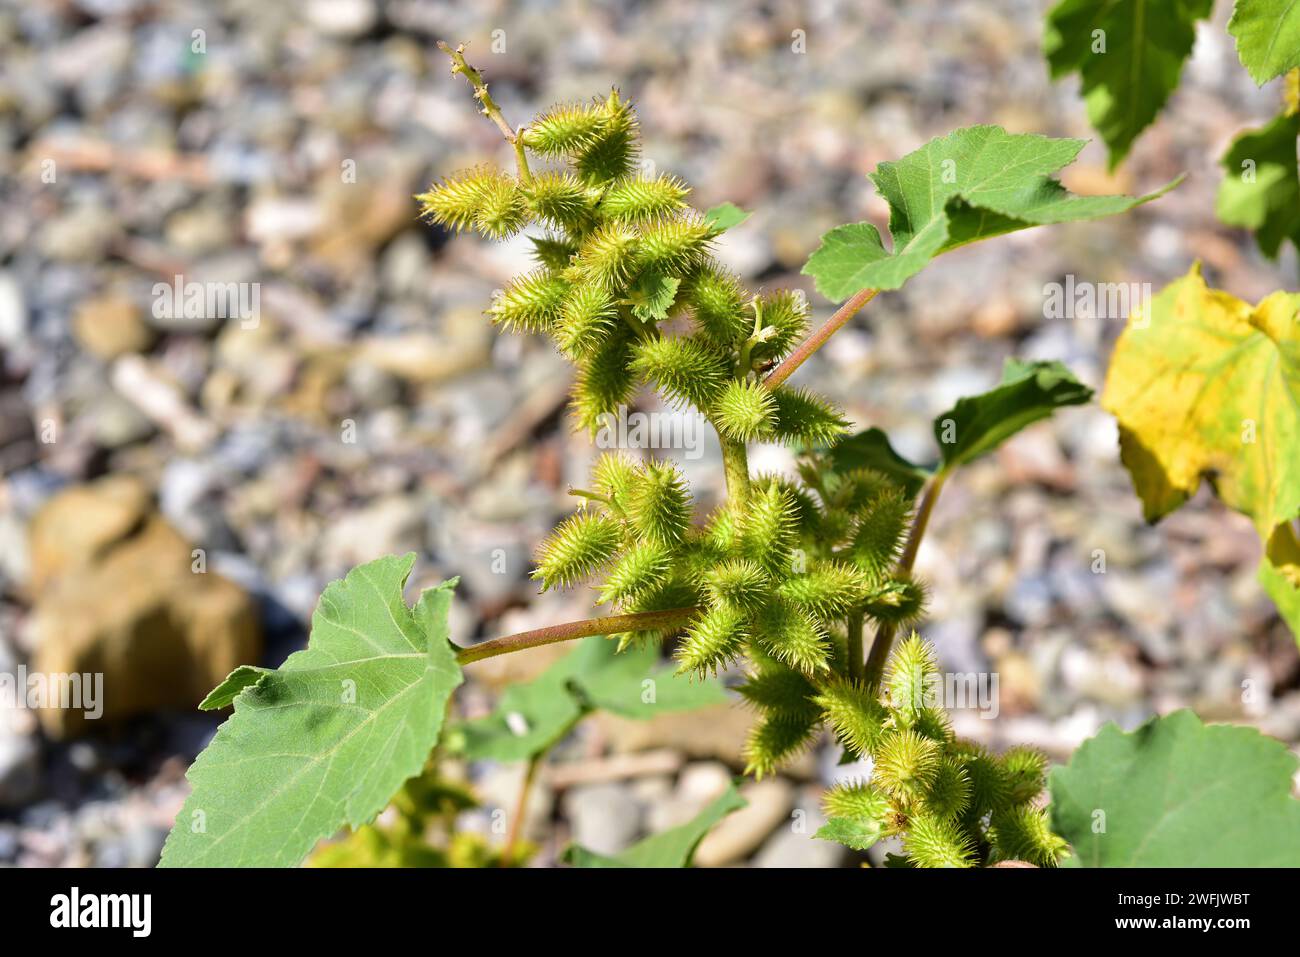 Cocklebur (Xanthium strumarium) is an annual plant native to North America and naturalized in Europe and Asia. Spiny fruits and leaves detail. This ph Stock Photo